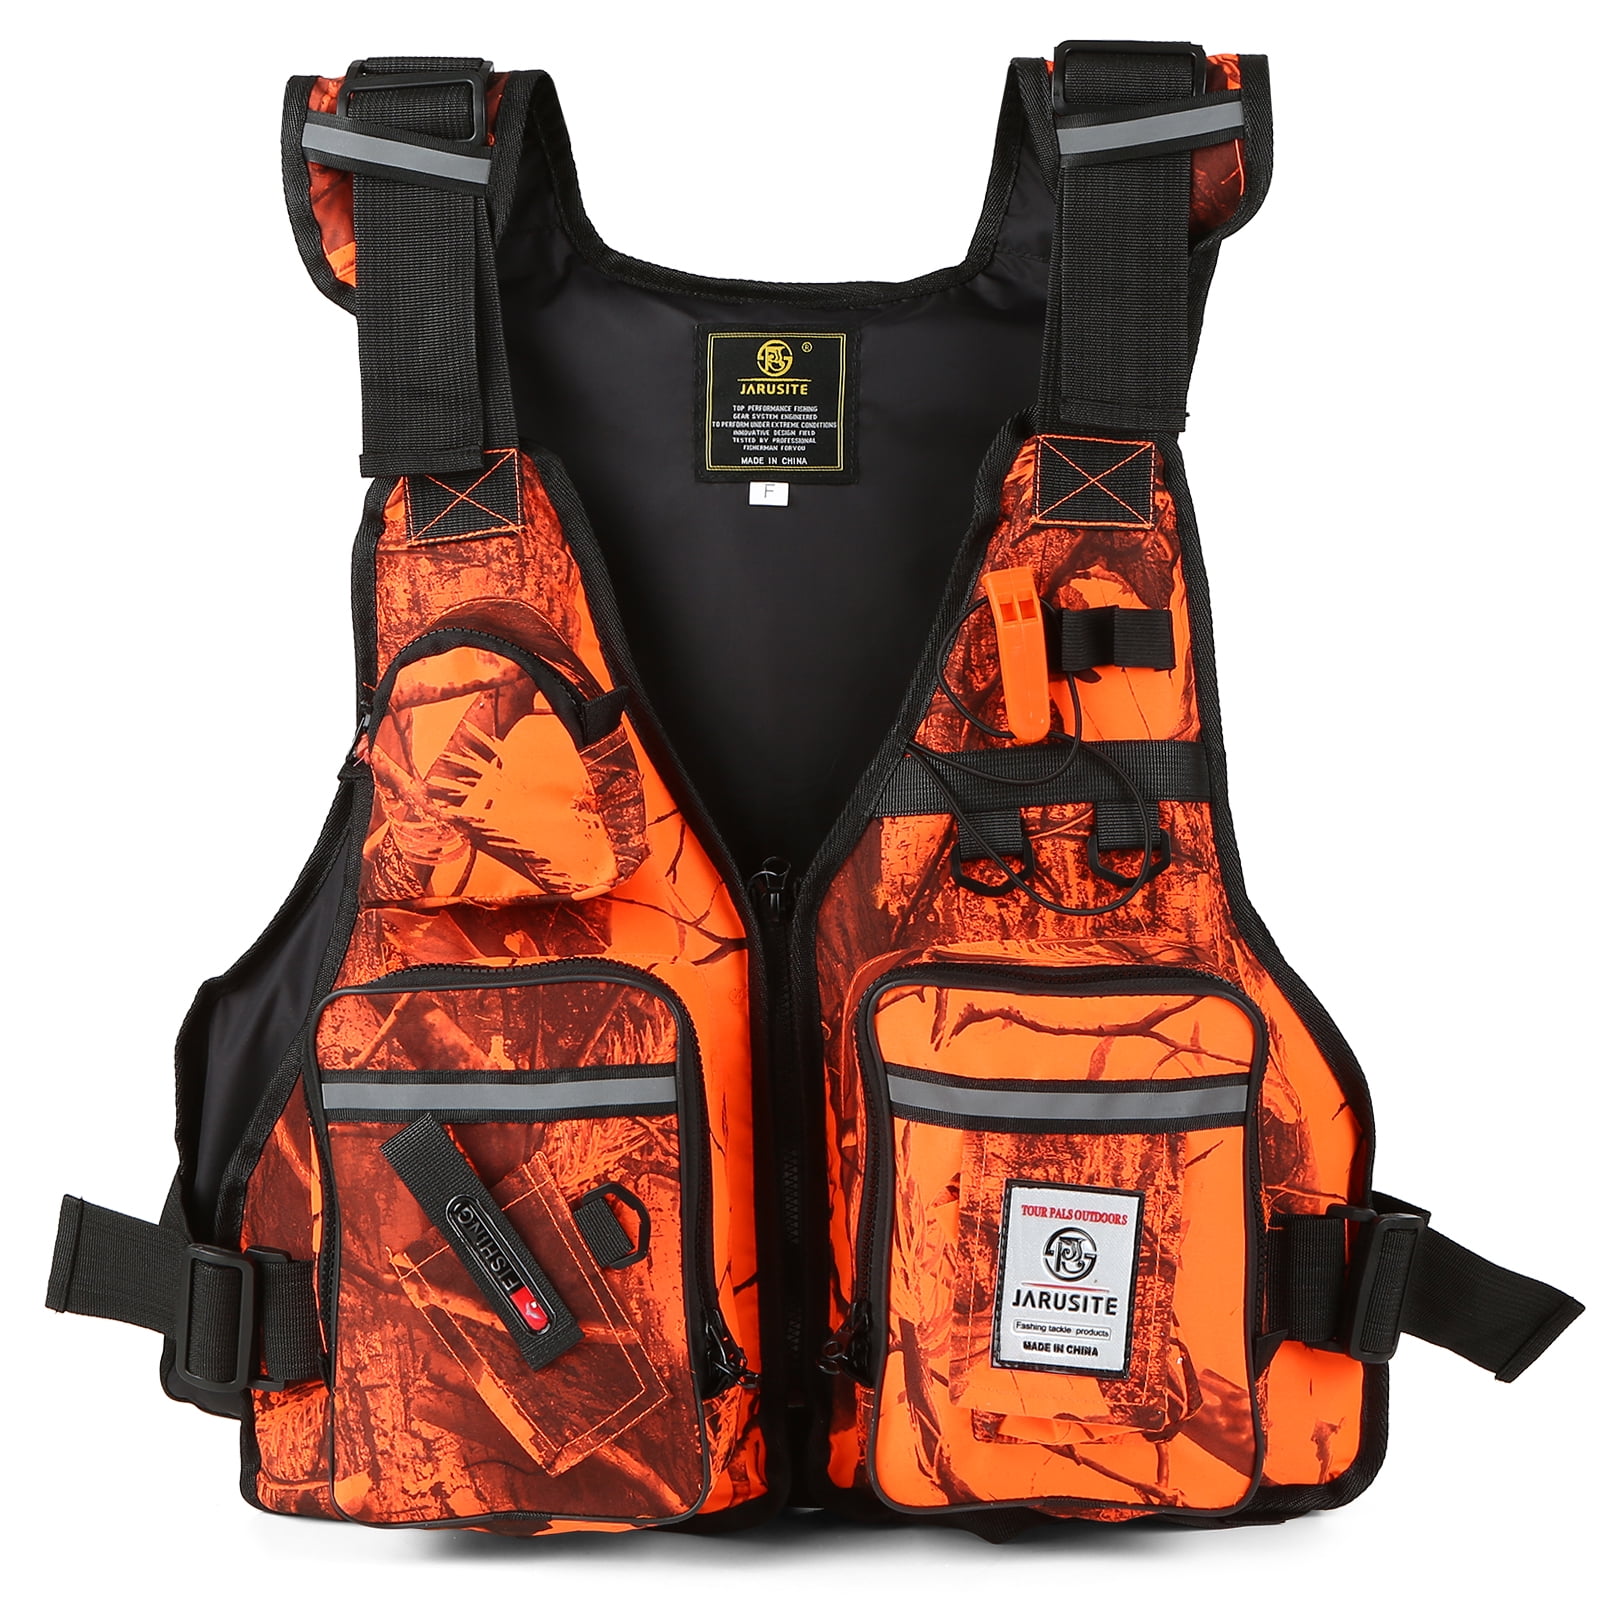 JARUSITE Multi-Pockets Fly Fishing Jacket Vest with Water Bottle Holder for  Kayaking Sailing Boating Water Sports